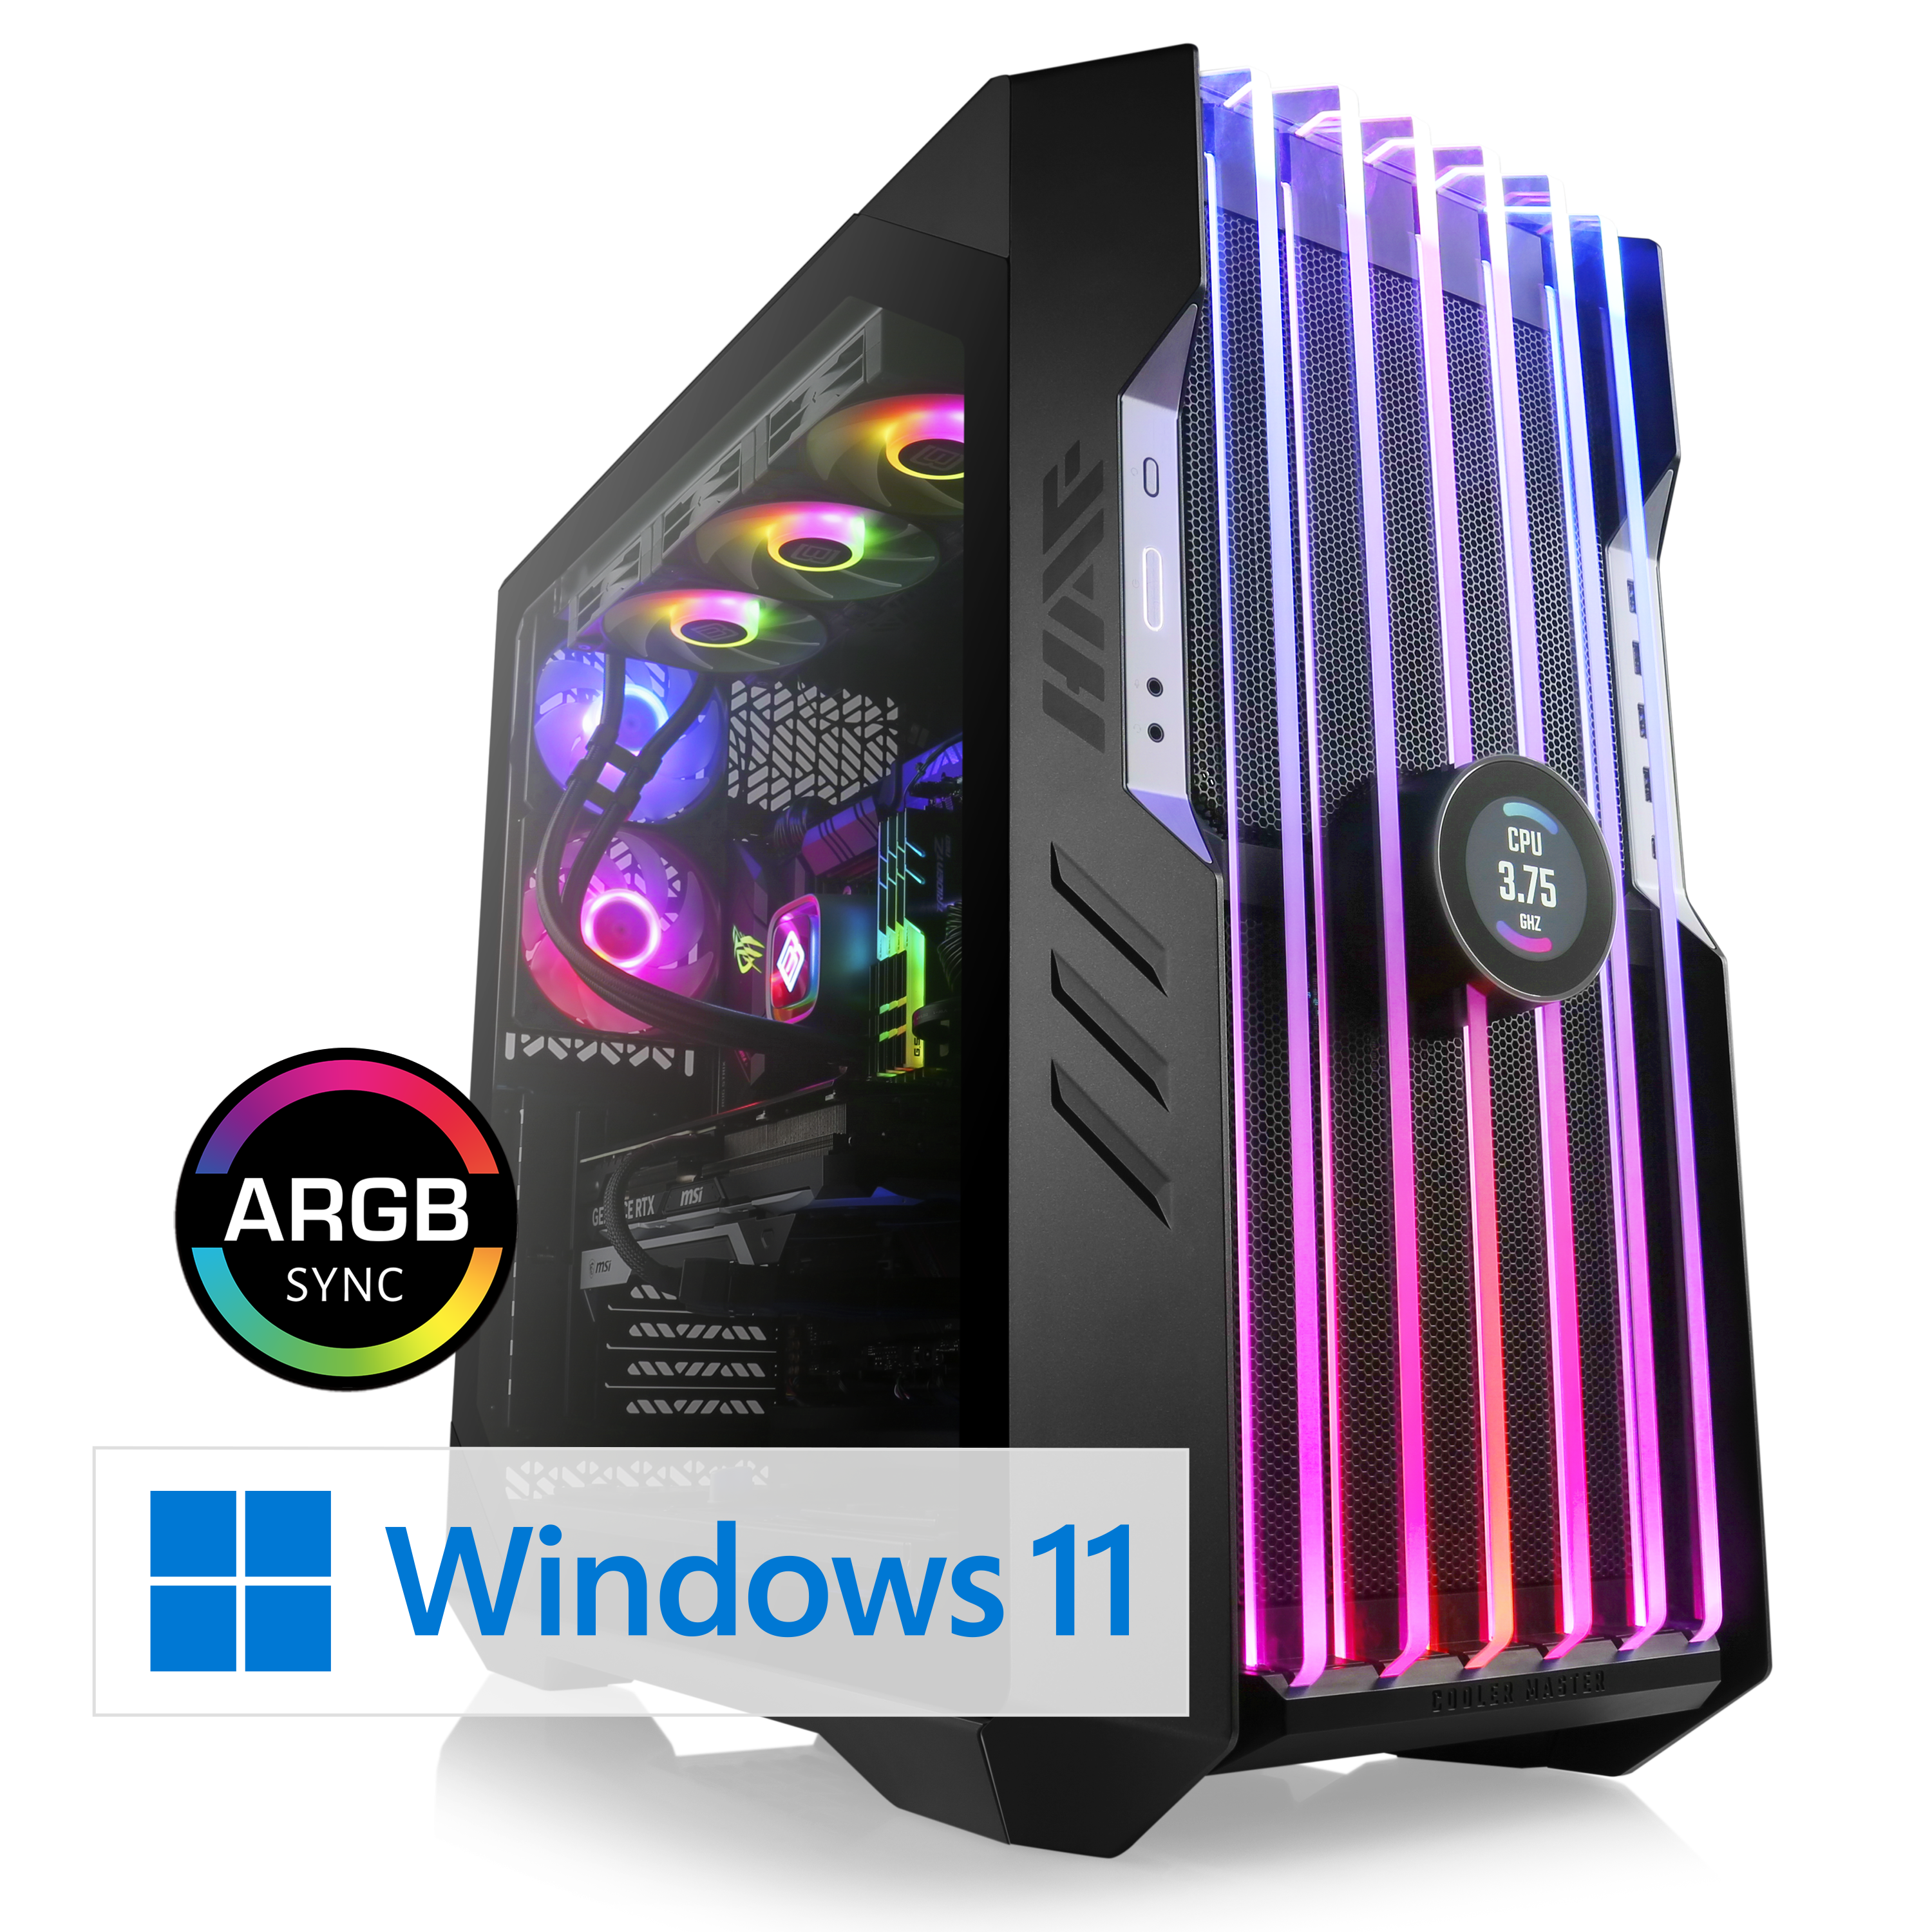 Boitier PC ASUS GT502 TUF GAMING CASE TEMPERERD GLASS WH